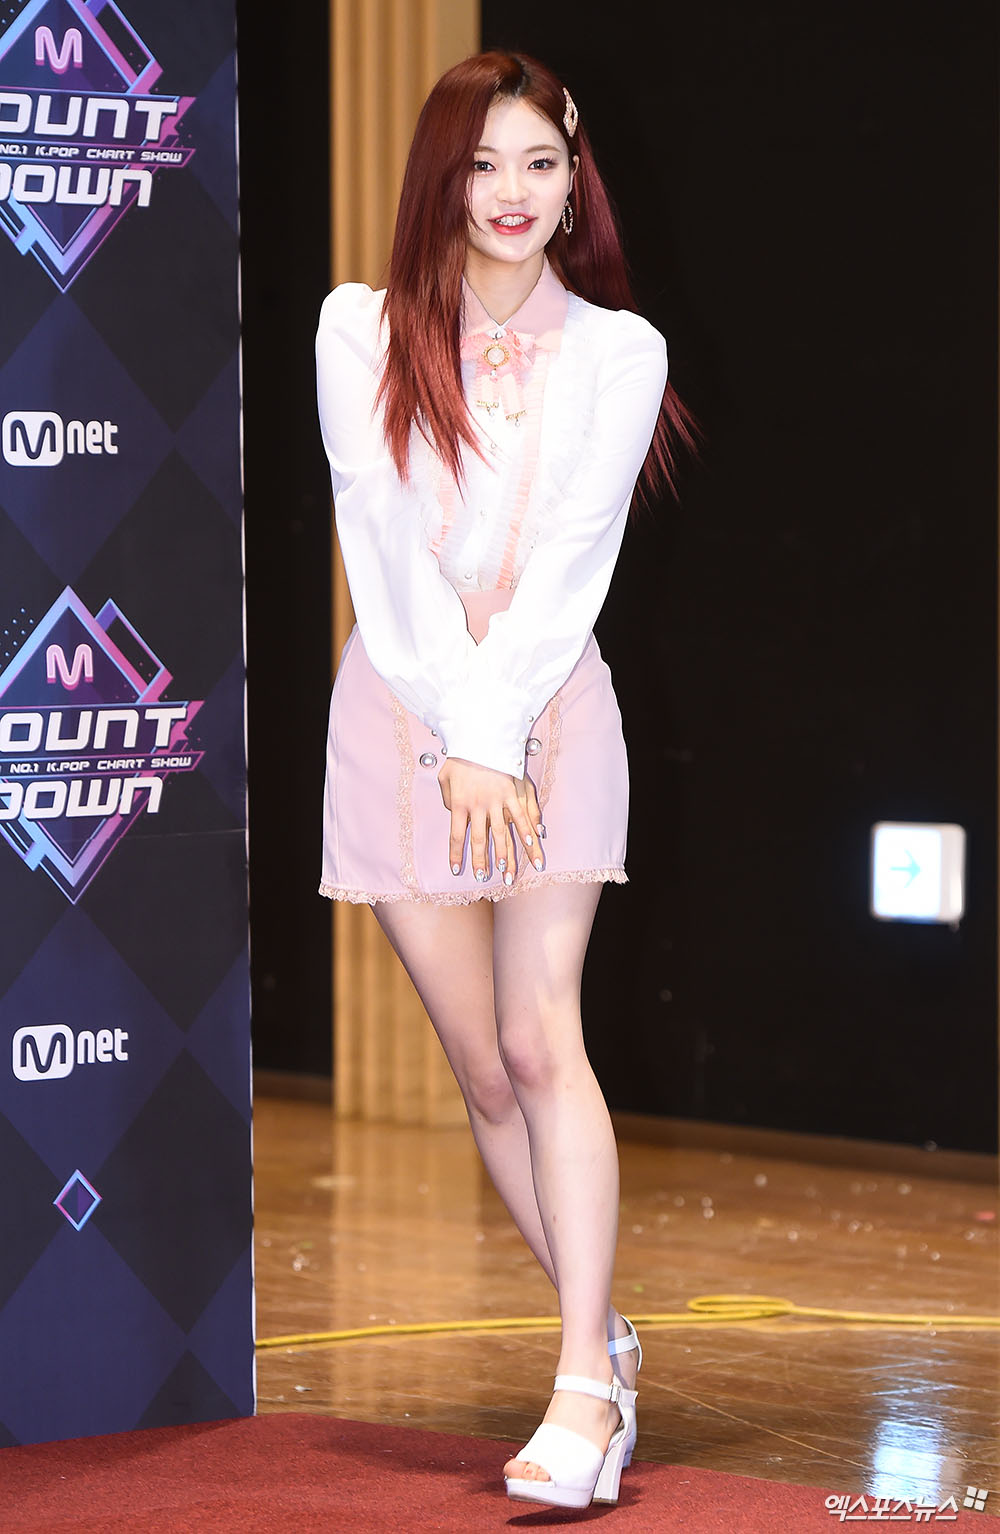 DIA Sommy, who attended the rehearsal of Mnet M Countdown held at CJ E & M Center in Sangam-dong, Seoul on the afternoon of the 25th, is posing.